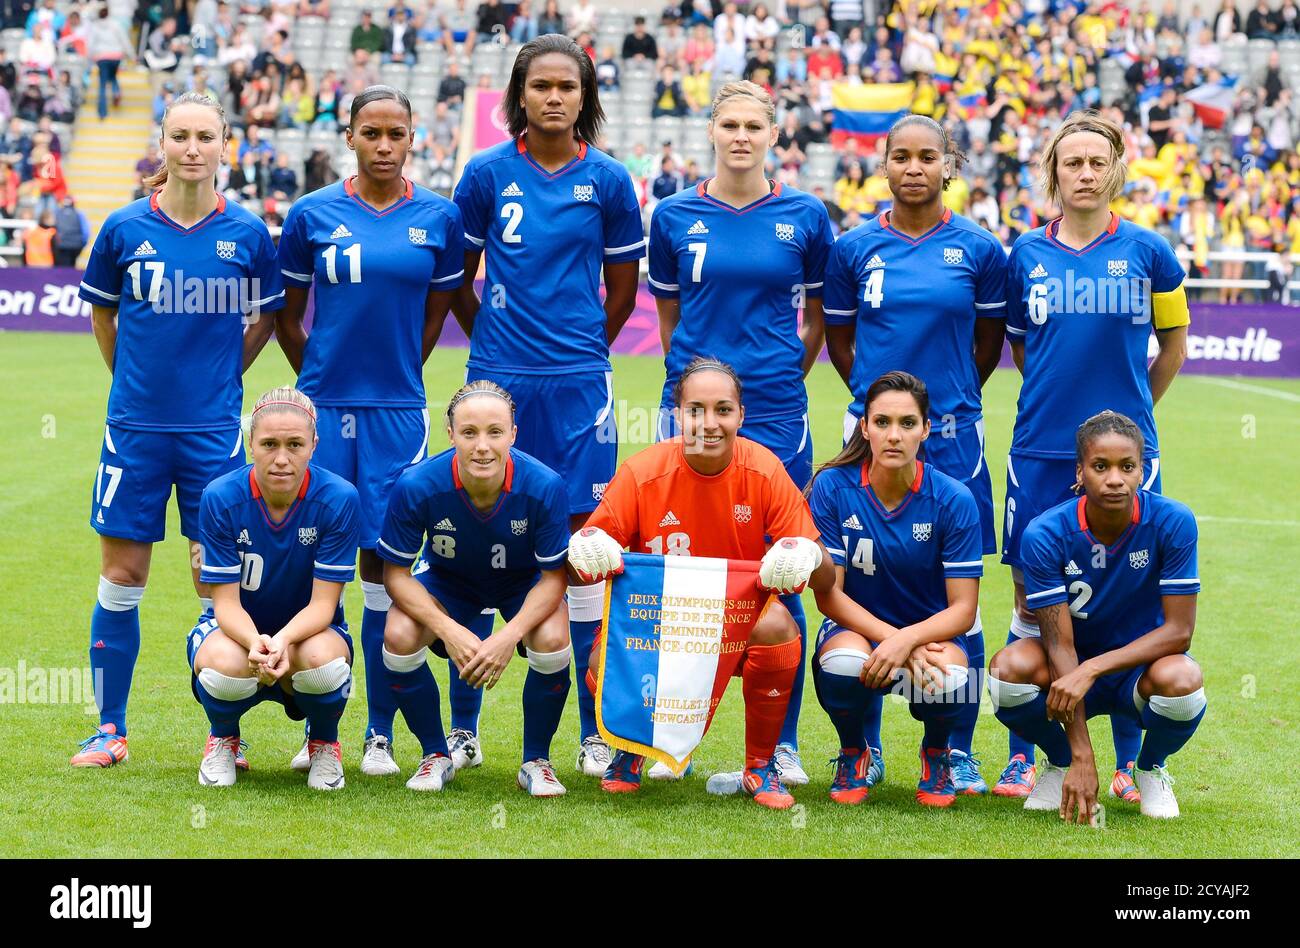 The French team poses before their women's Group G football match against  Colombia at the London 2012 Olympic Games at St James' Park in Newcastle,  northern England July 31, 2012. REUTERS/Nigel Roddis (